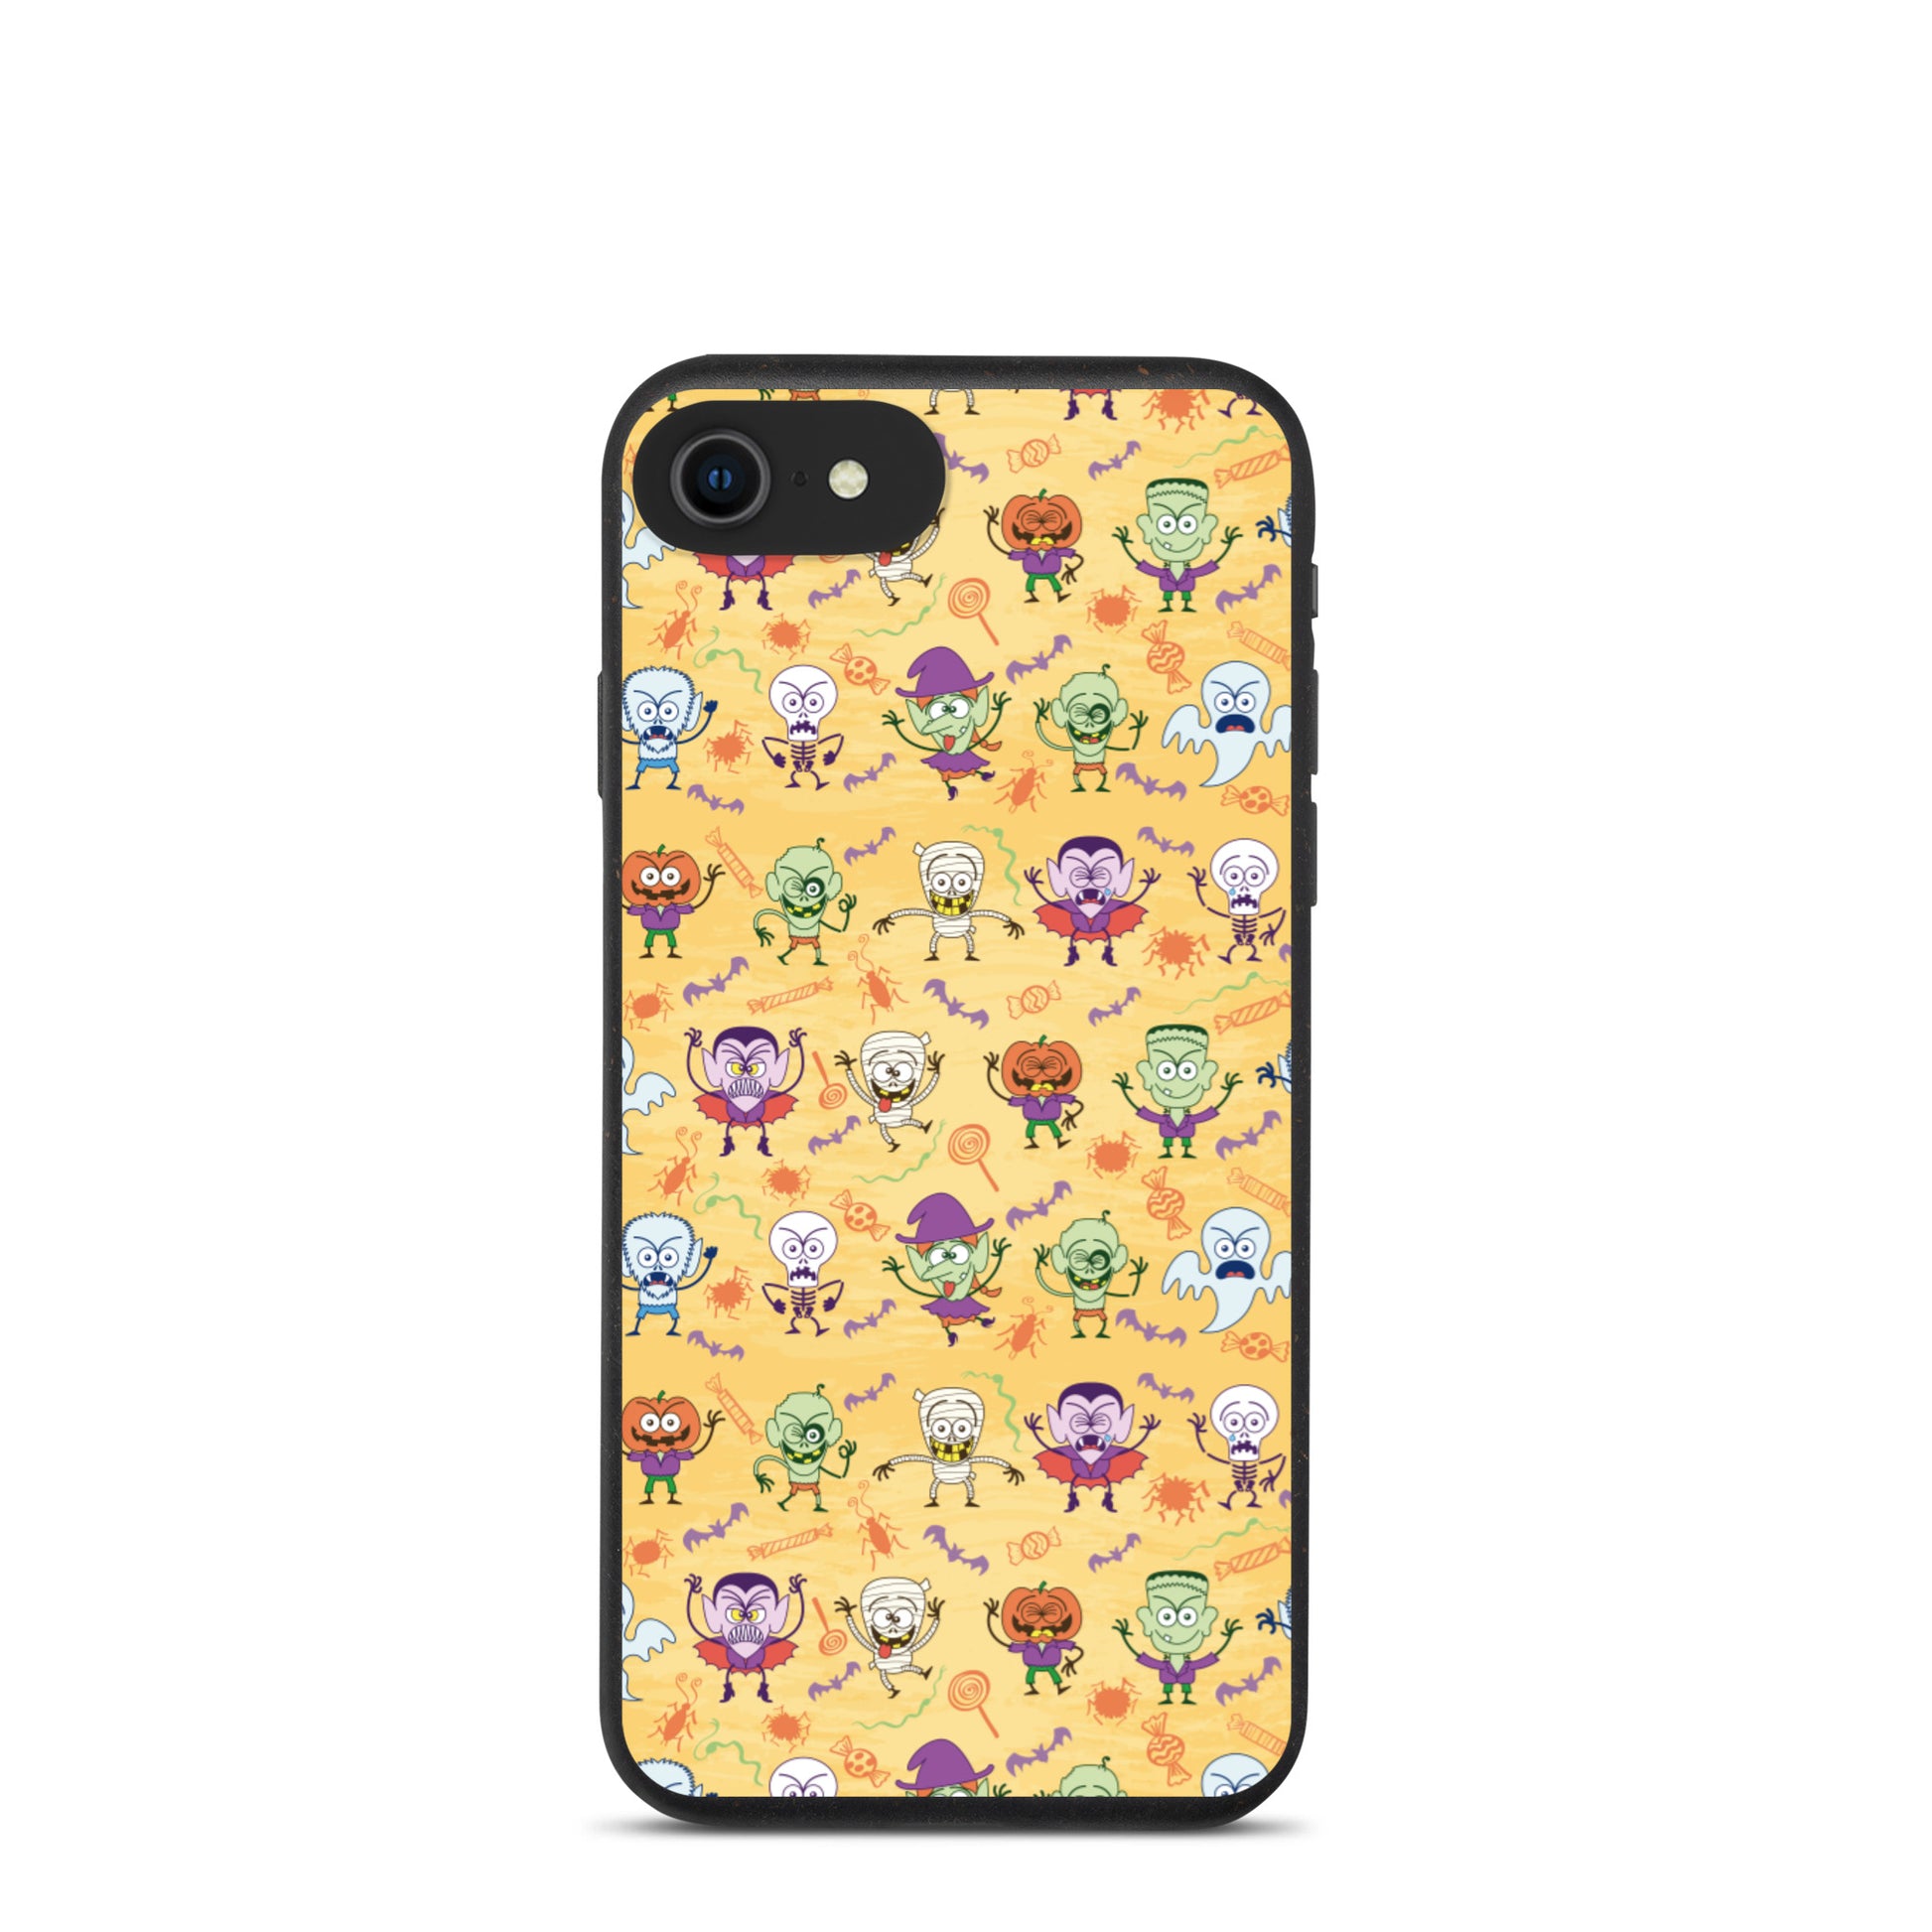 Halloween characters making funny faces Speckled iPhone case. IPhone 7 se, 8 se